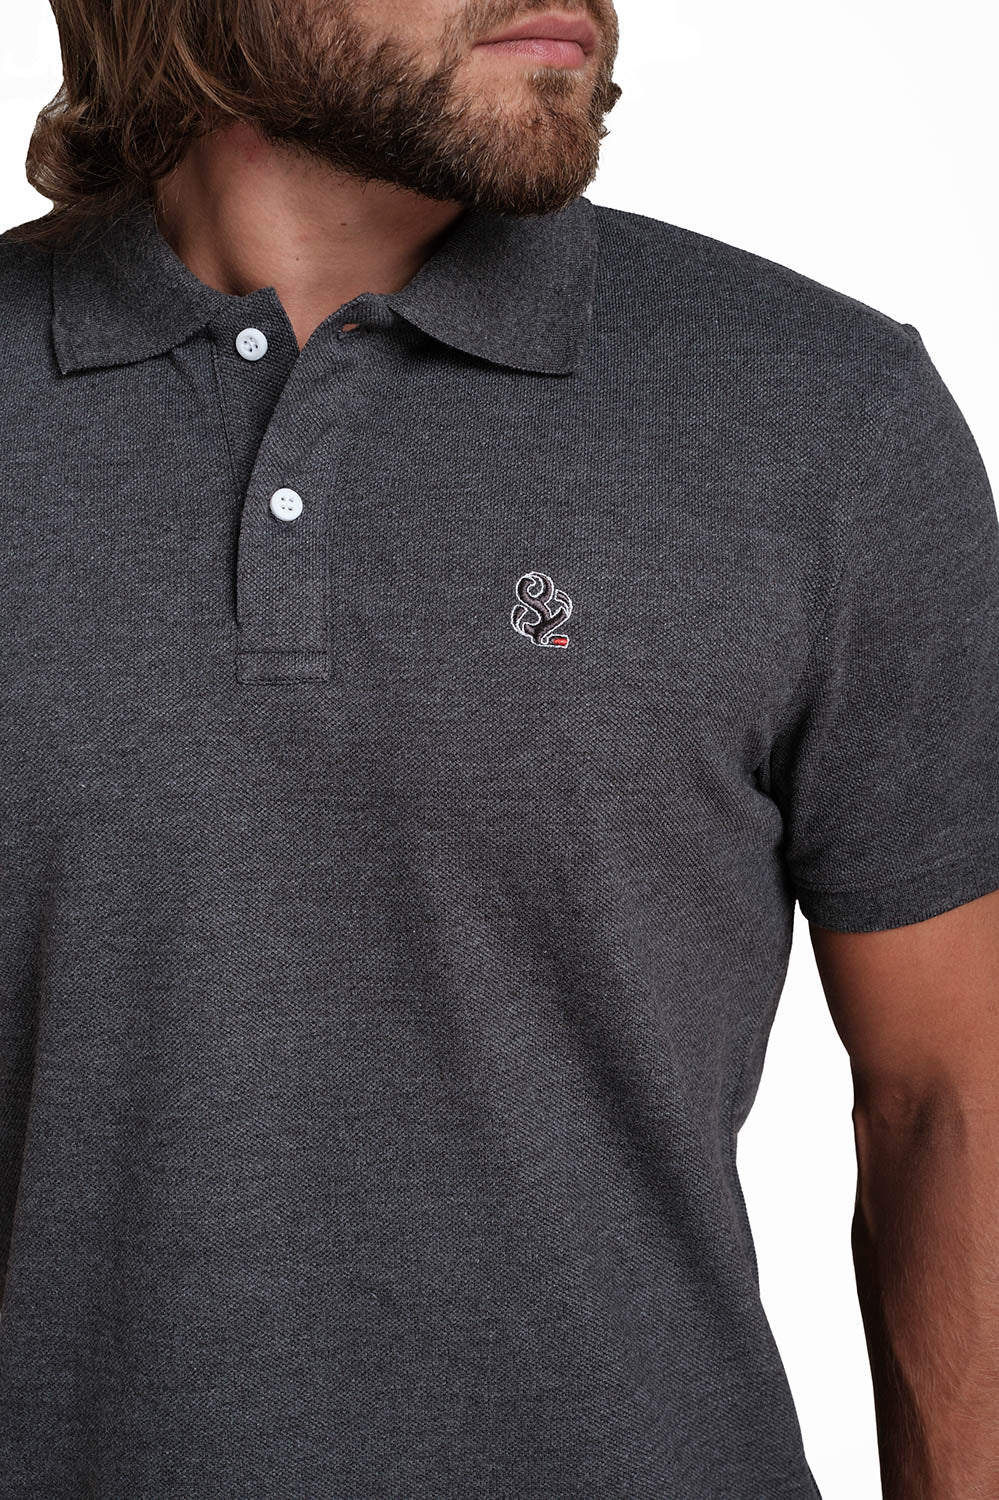 Polo Charcoal T-shirts with Front Embroidery, Solid pique fabric